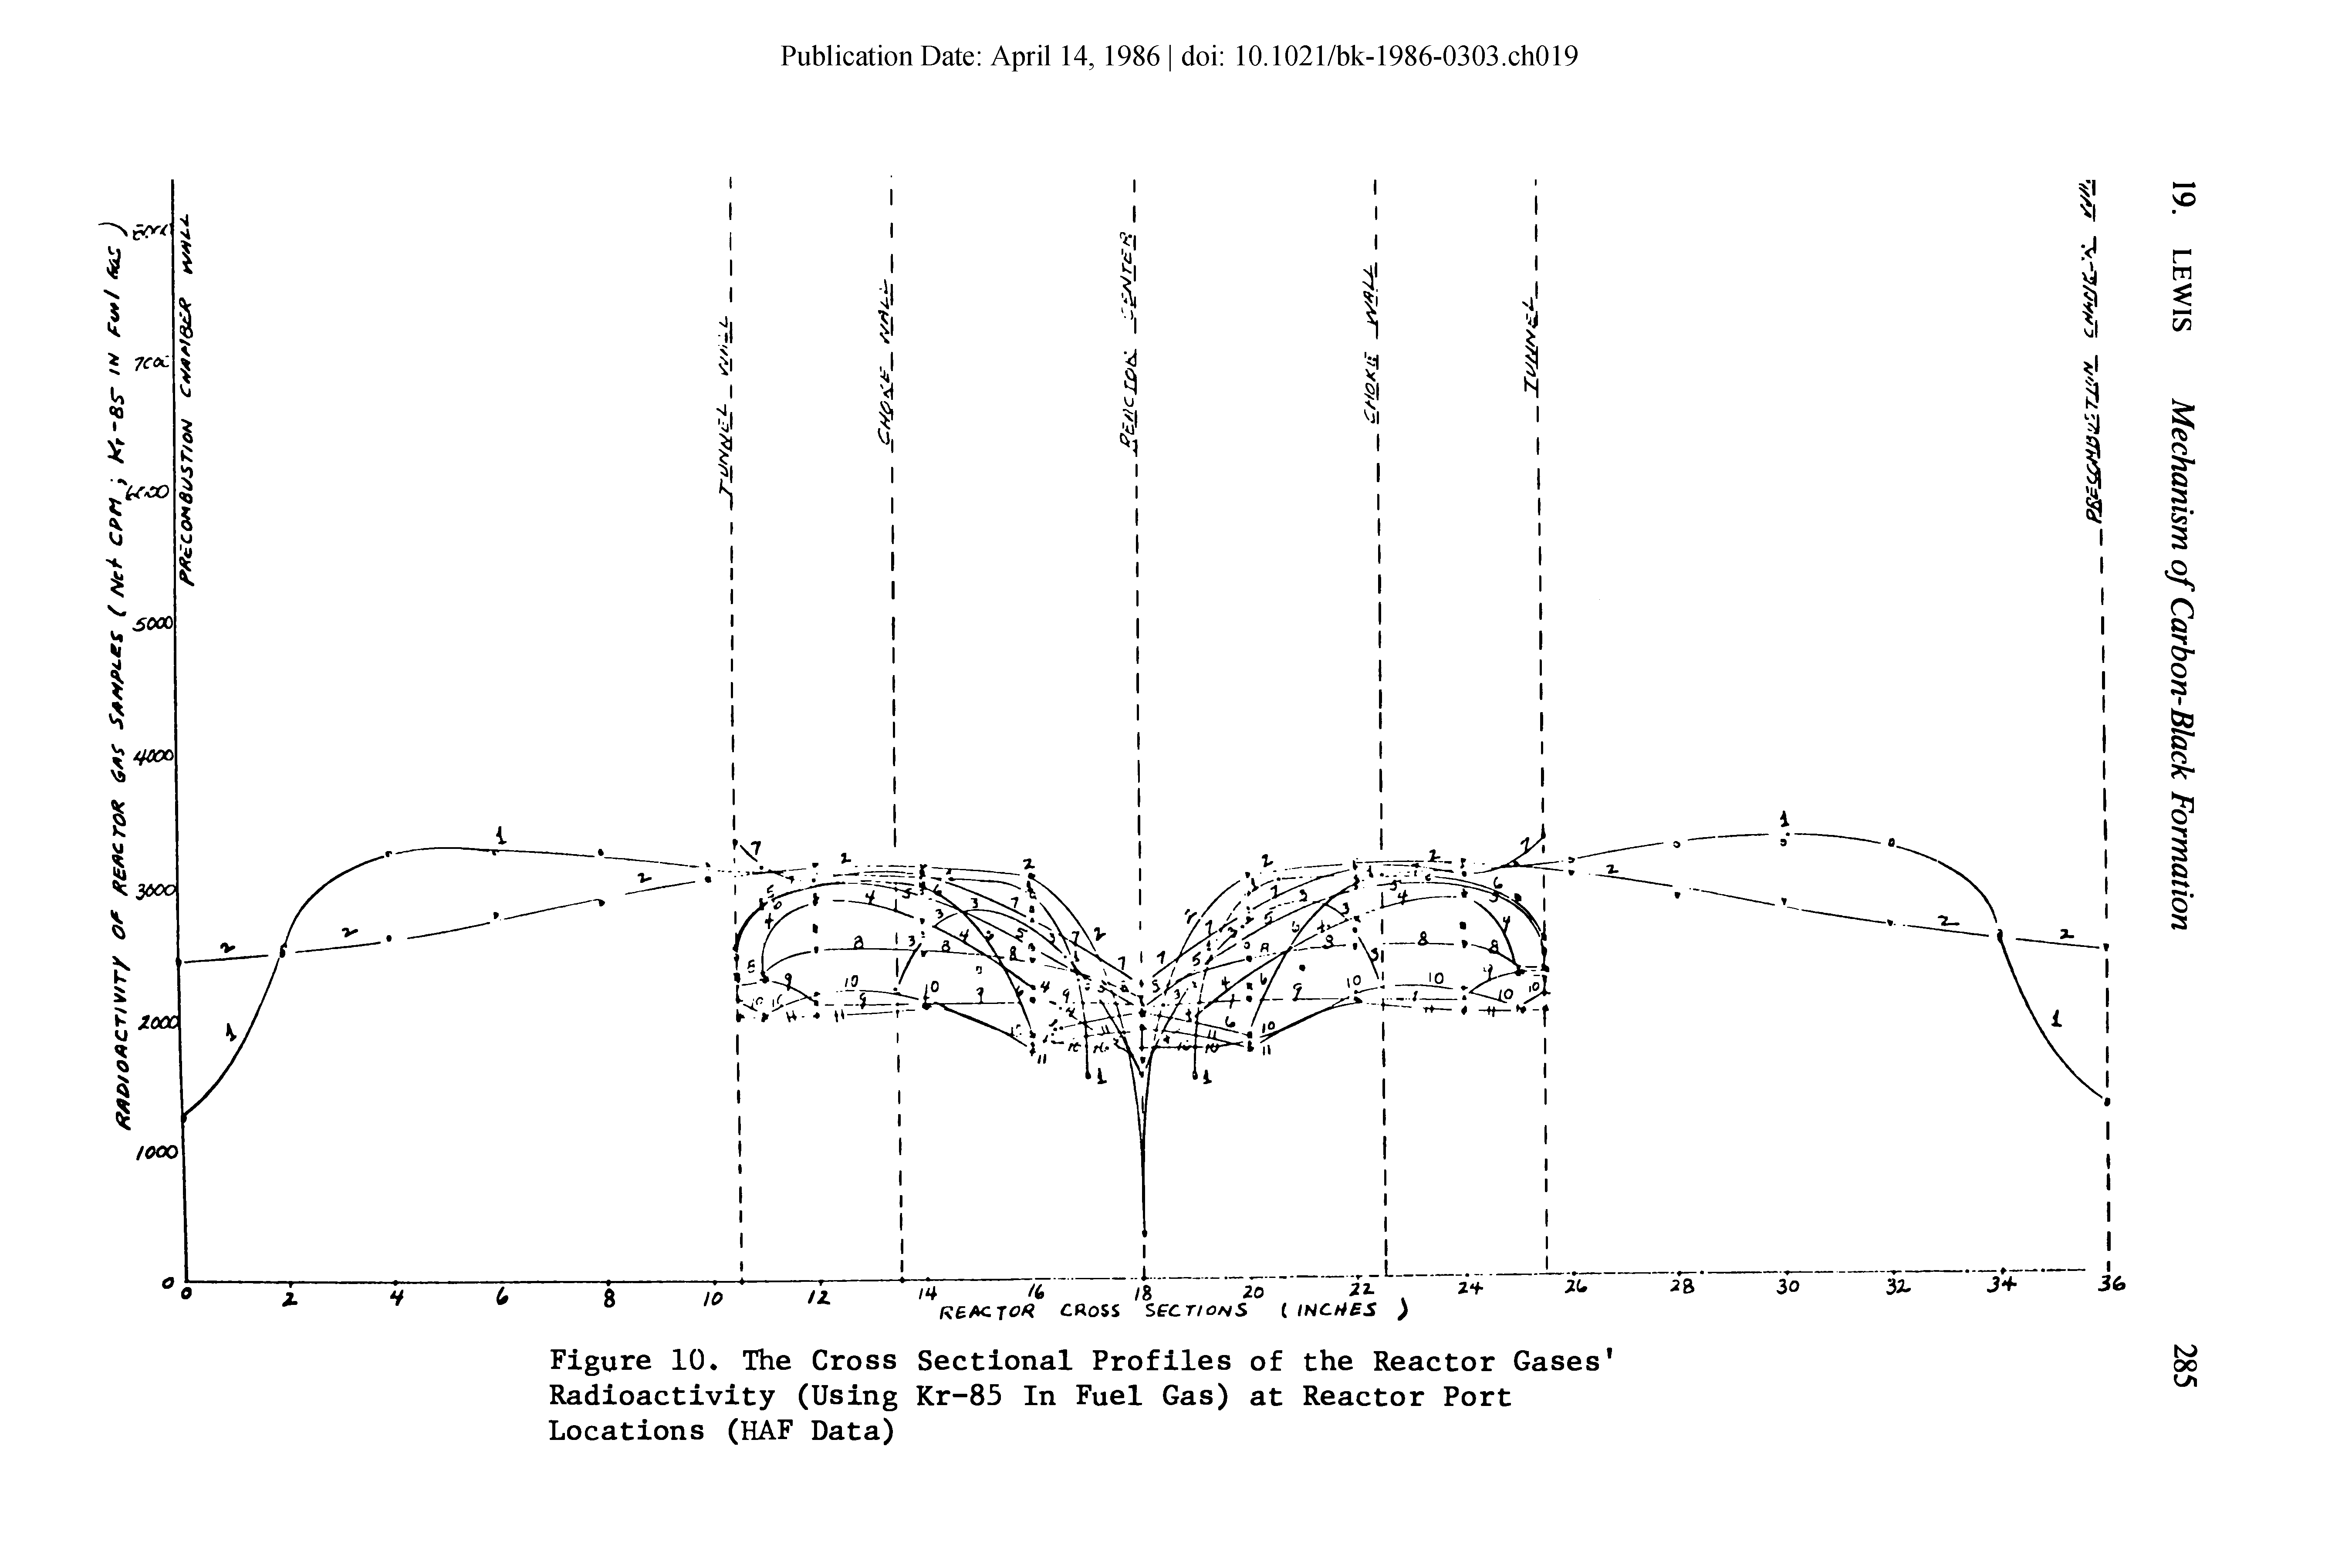 Figure 10. The Cross Sectional Profiles of the Reactor Gases Radioactivity (Using Kr-85 In Fuel Gas) at Reactor Port Locations (HAF Data)...